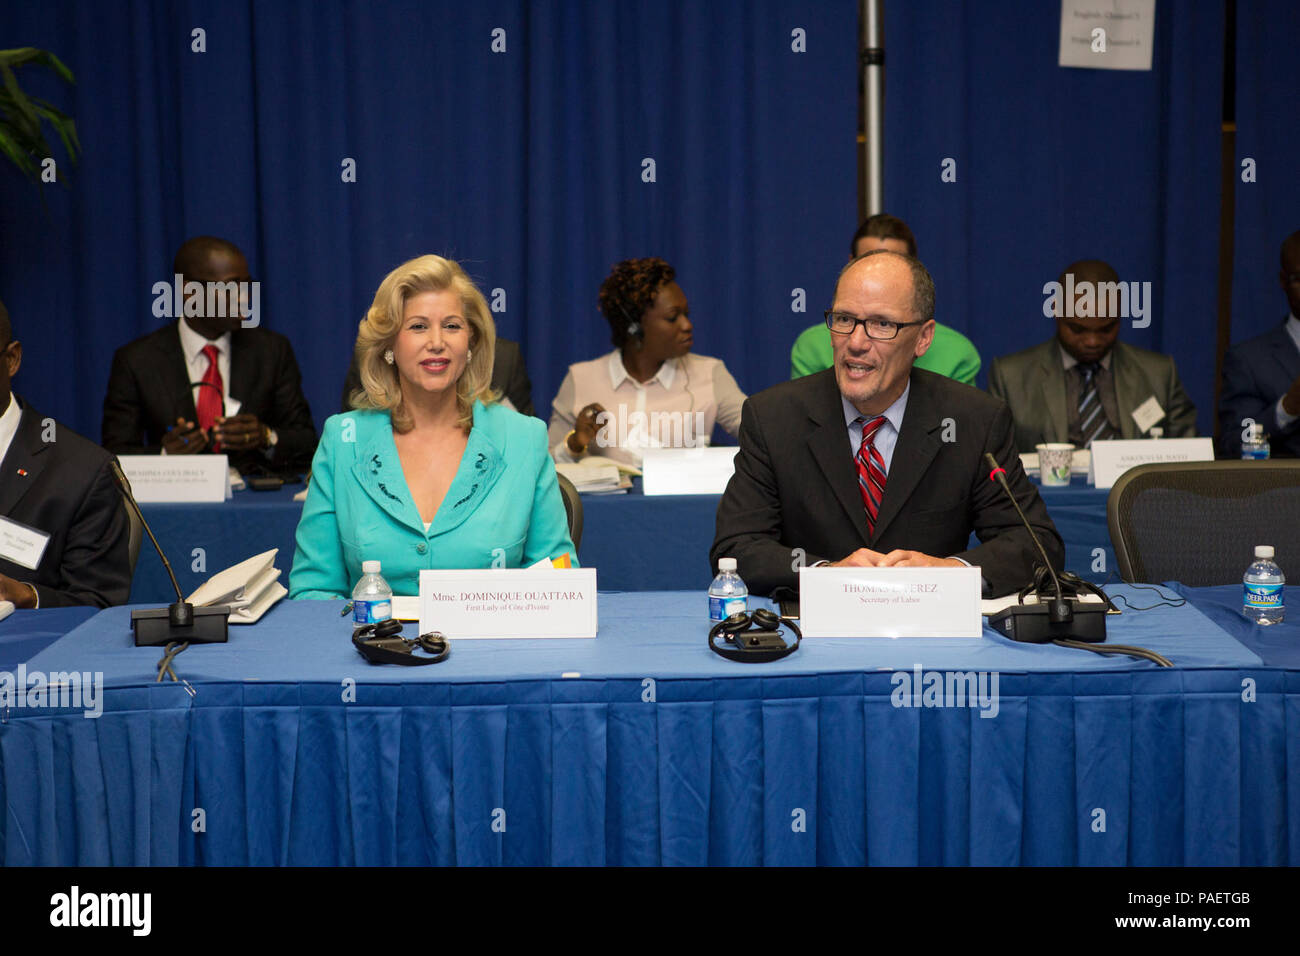 24 June 2015 – Washington, DC – U.S. Secretary of Labor Thomas Perez delivers remarks at the ILAB Cocoa Meetings.  Prior to the start of the meeting Secretary Perez meets with Madame Dominique Ouattara, First Lady of the Republic of Cote D'Ivoire. Stock Photo